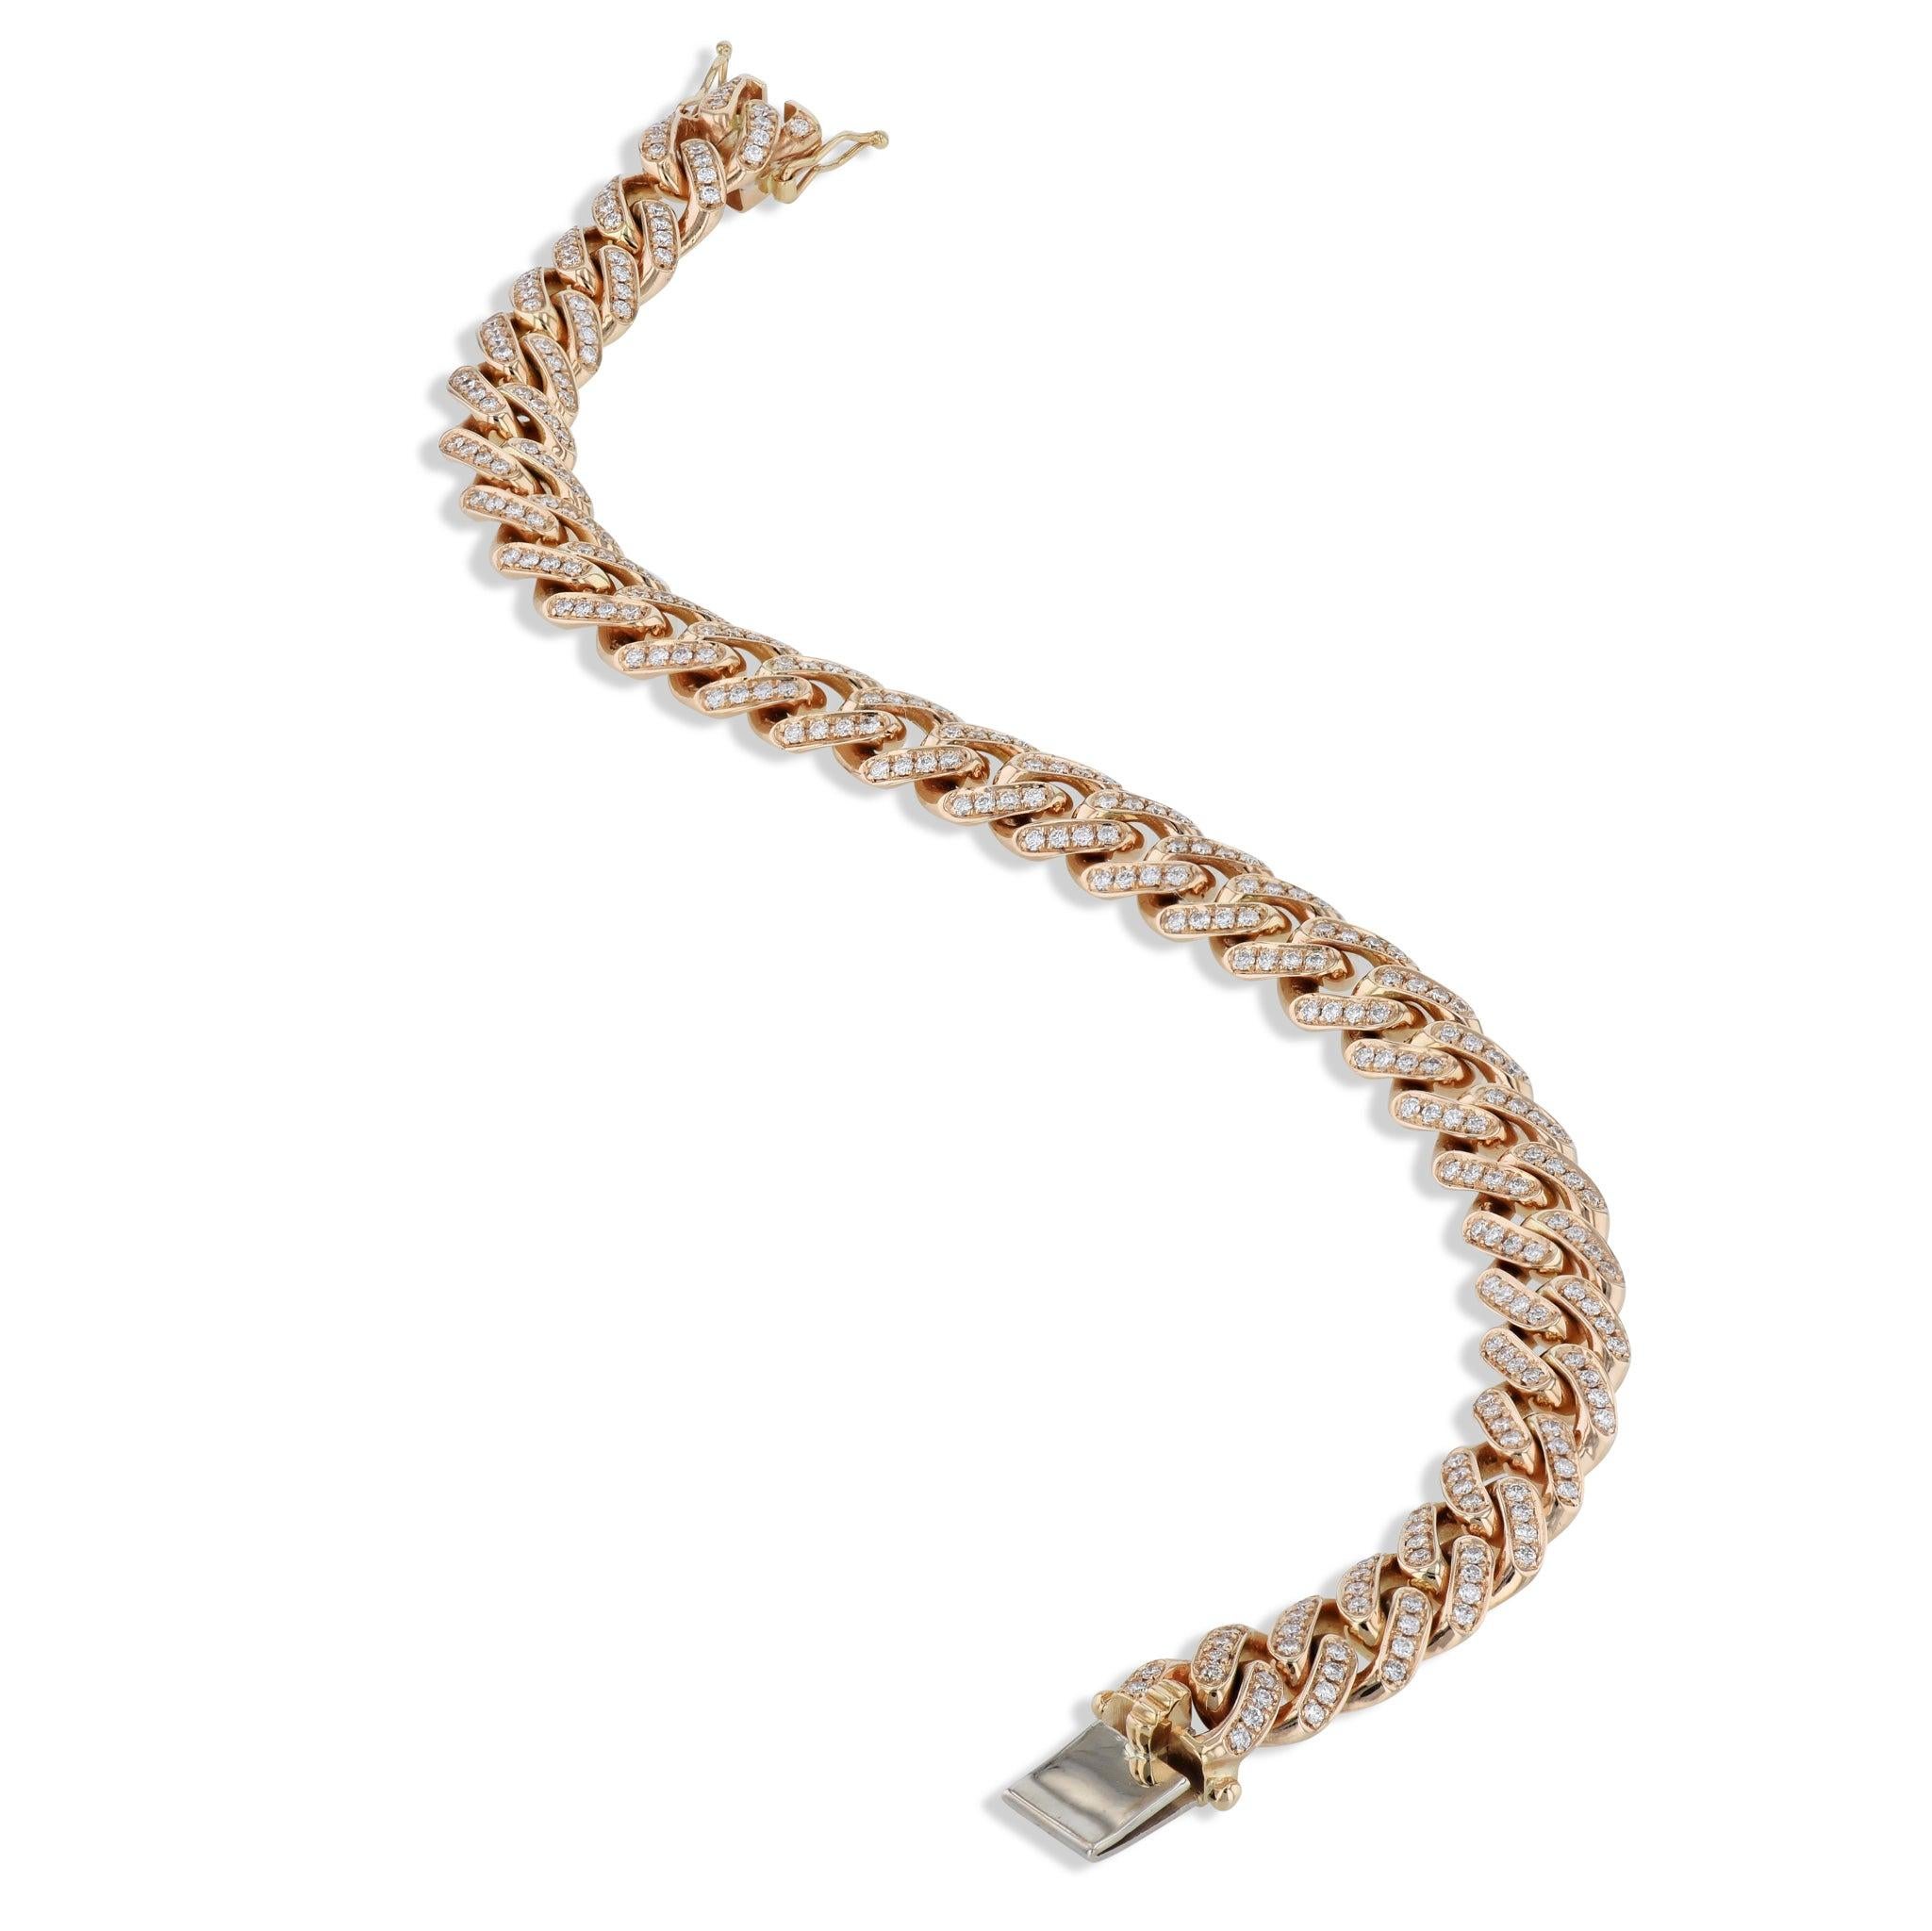 Indulge yourself with our luxurious Cuban Diamond Rose Gold Link Bracelet! 18kt. Rose Gold defines the 266 stunning diamonds, masterfully arranged in a Cuban Link style. Lovingly handmade, this exquisite piece from the H&H Collection is sure to